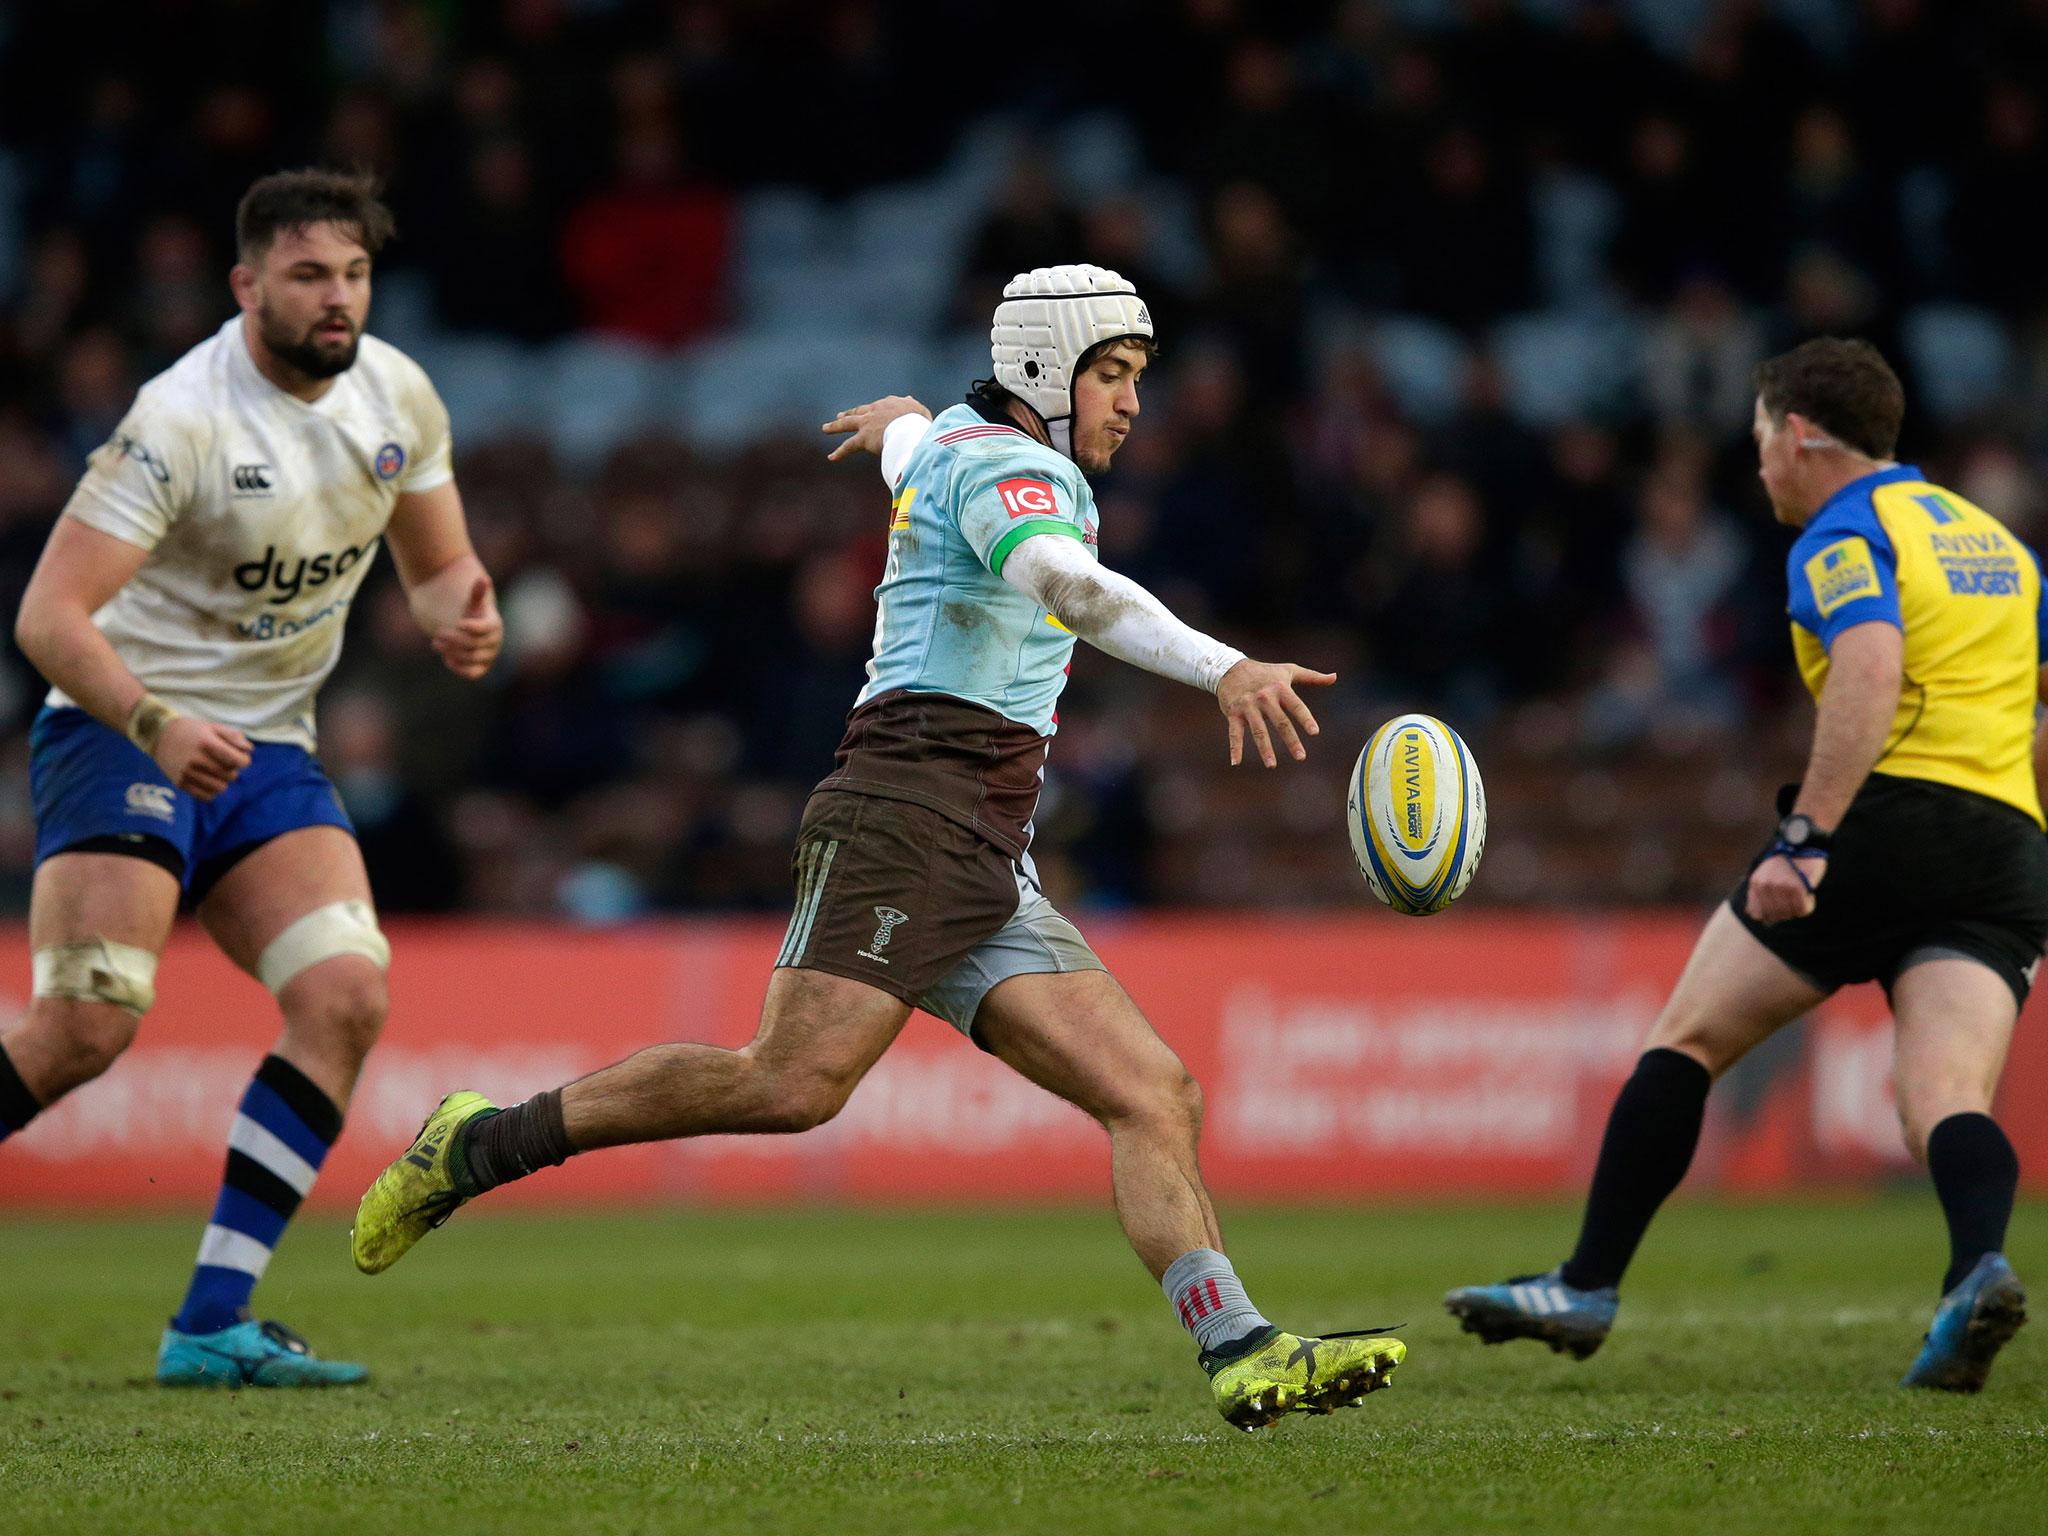 Demetri Catrakilis made his return to action for Harlequins over the weekend